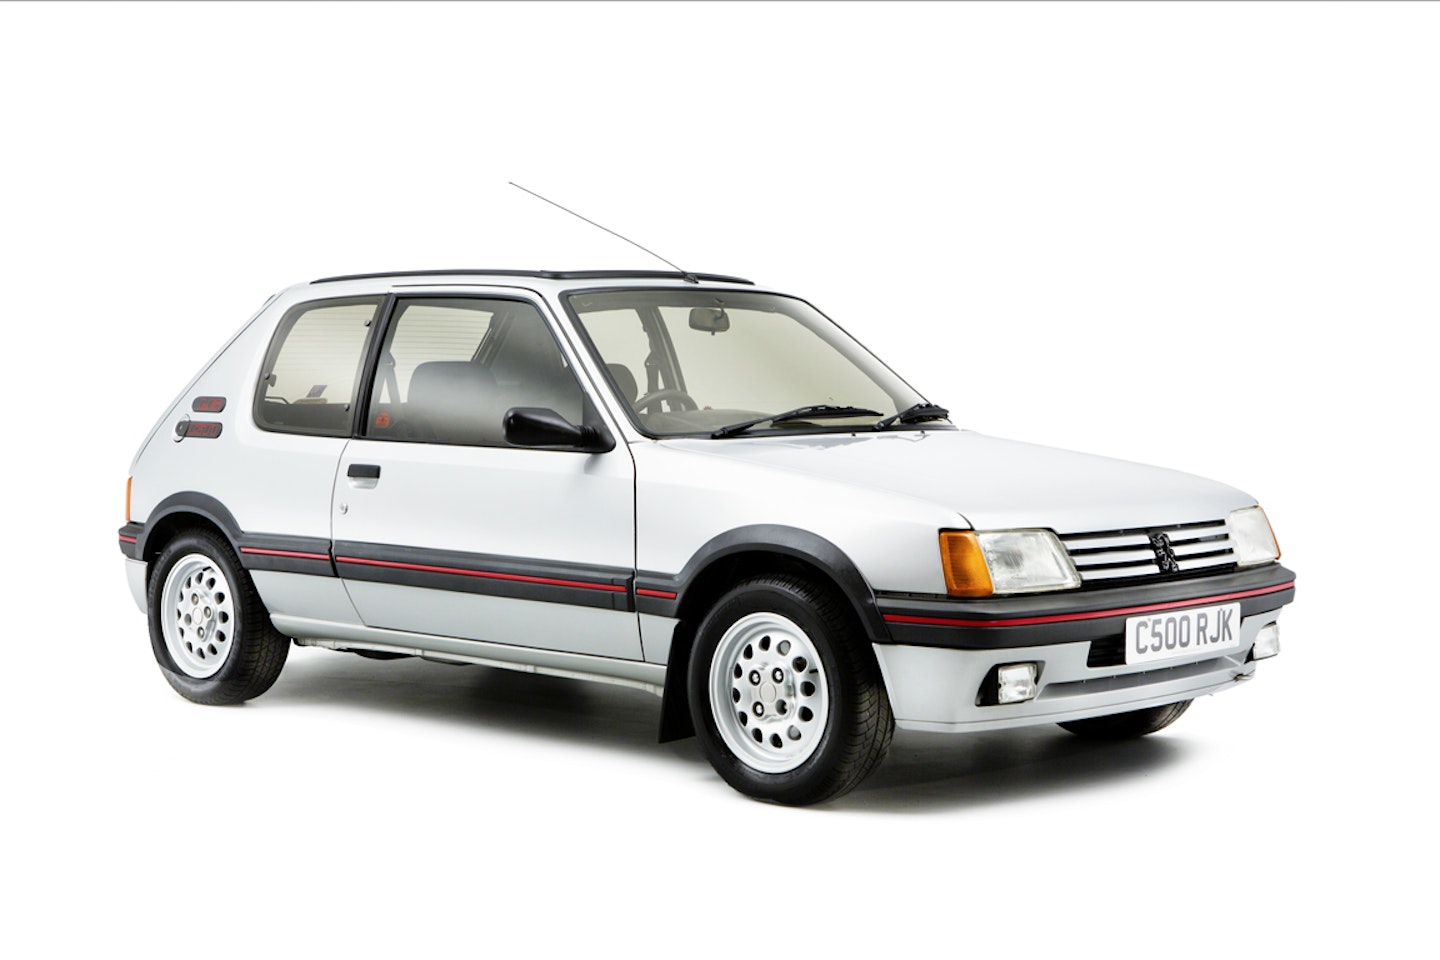 Is The Peugeot 205 GTI 1.6 Really The Greatest Hot Hatch of All